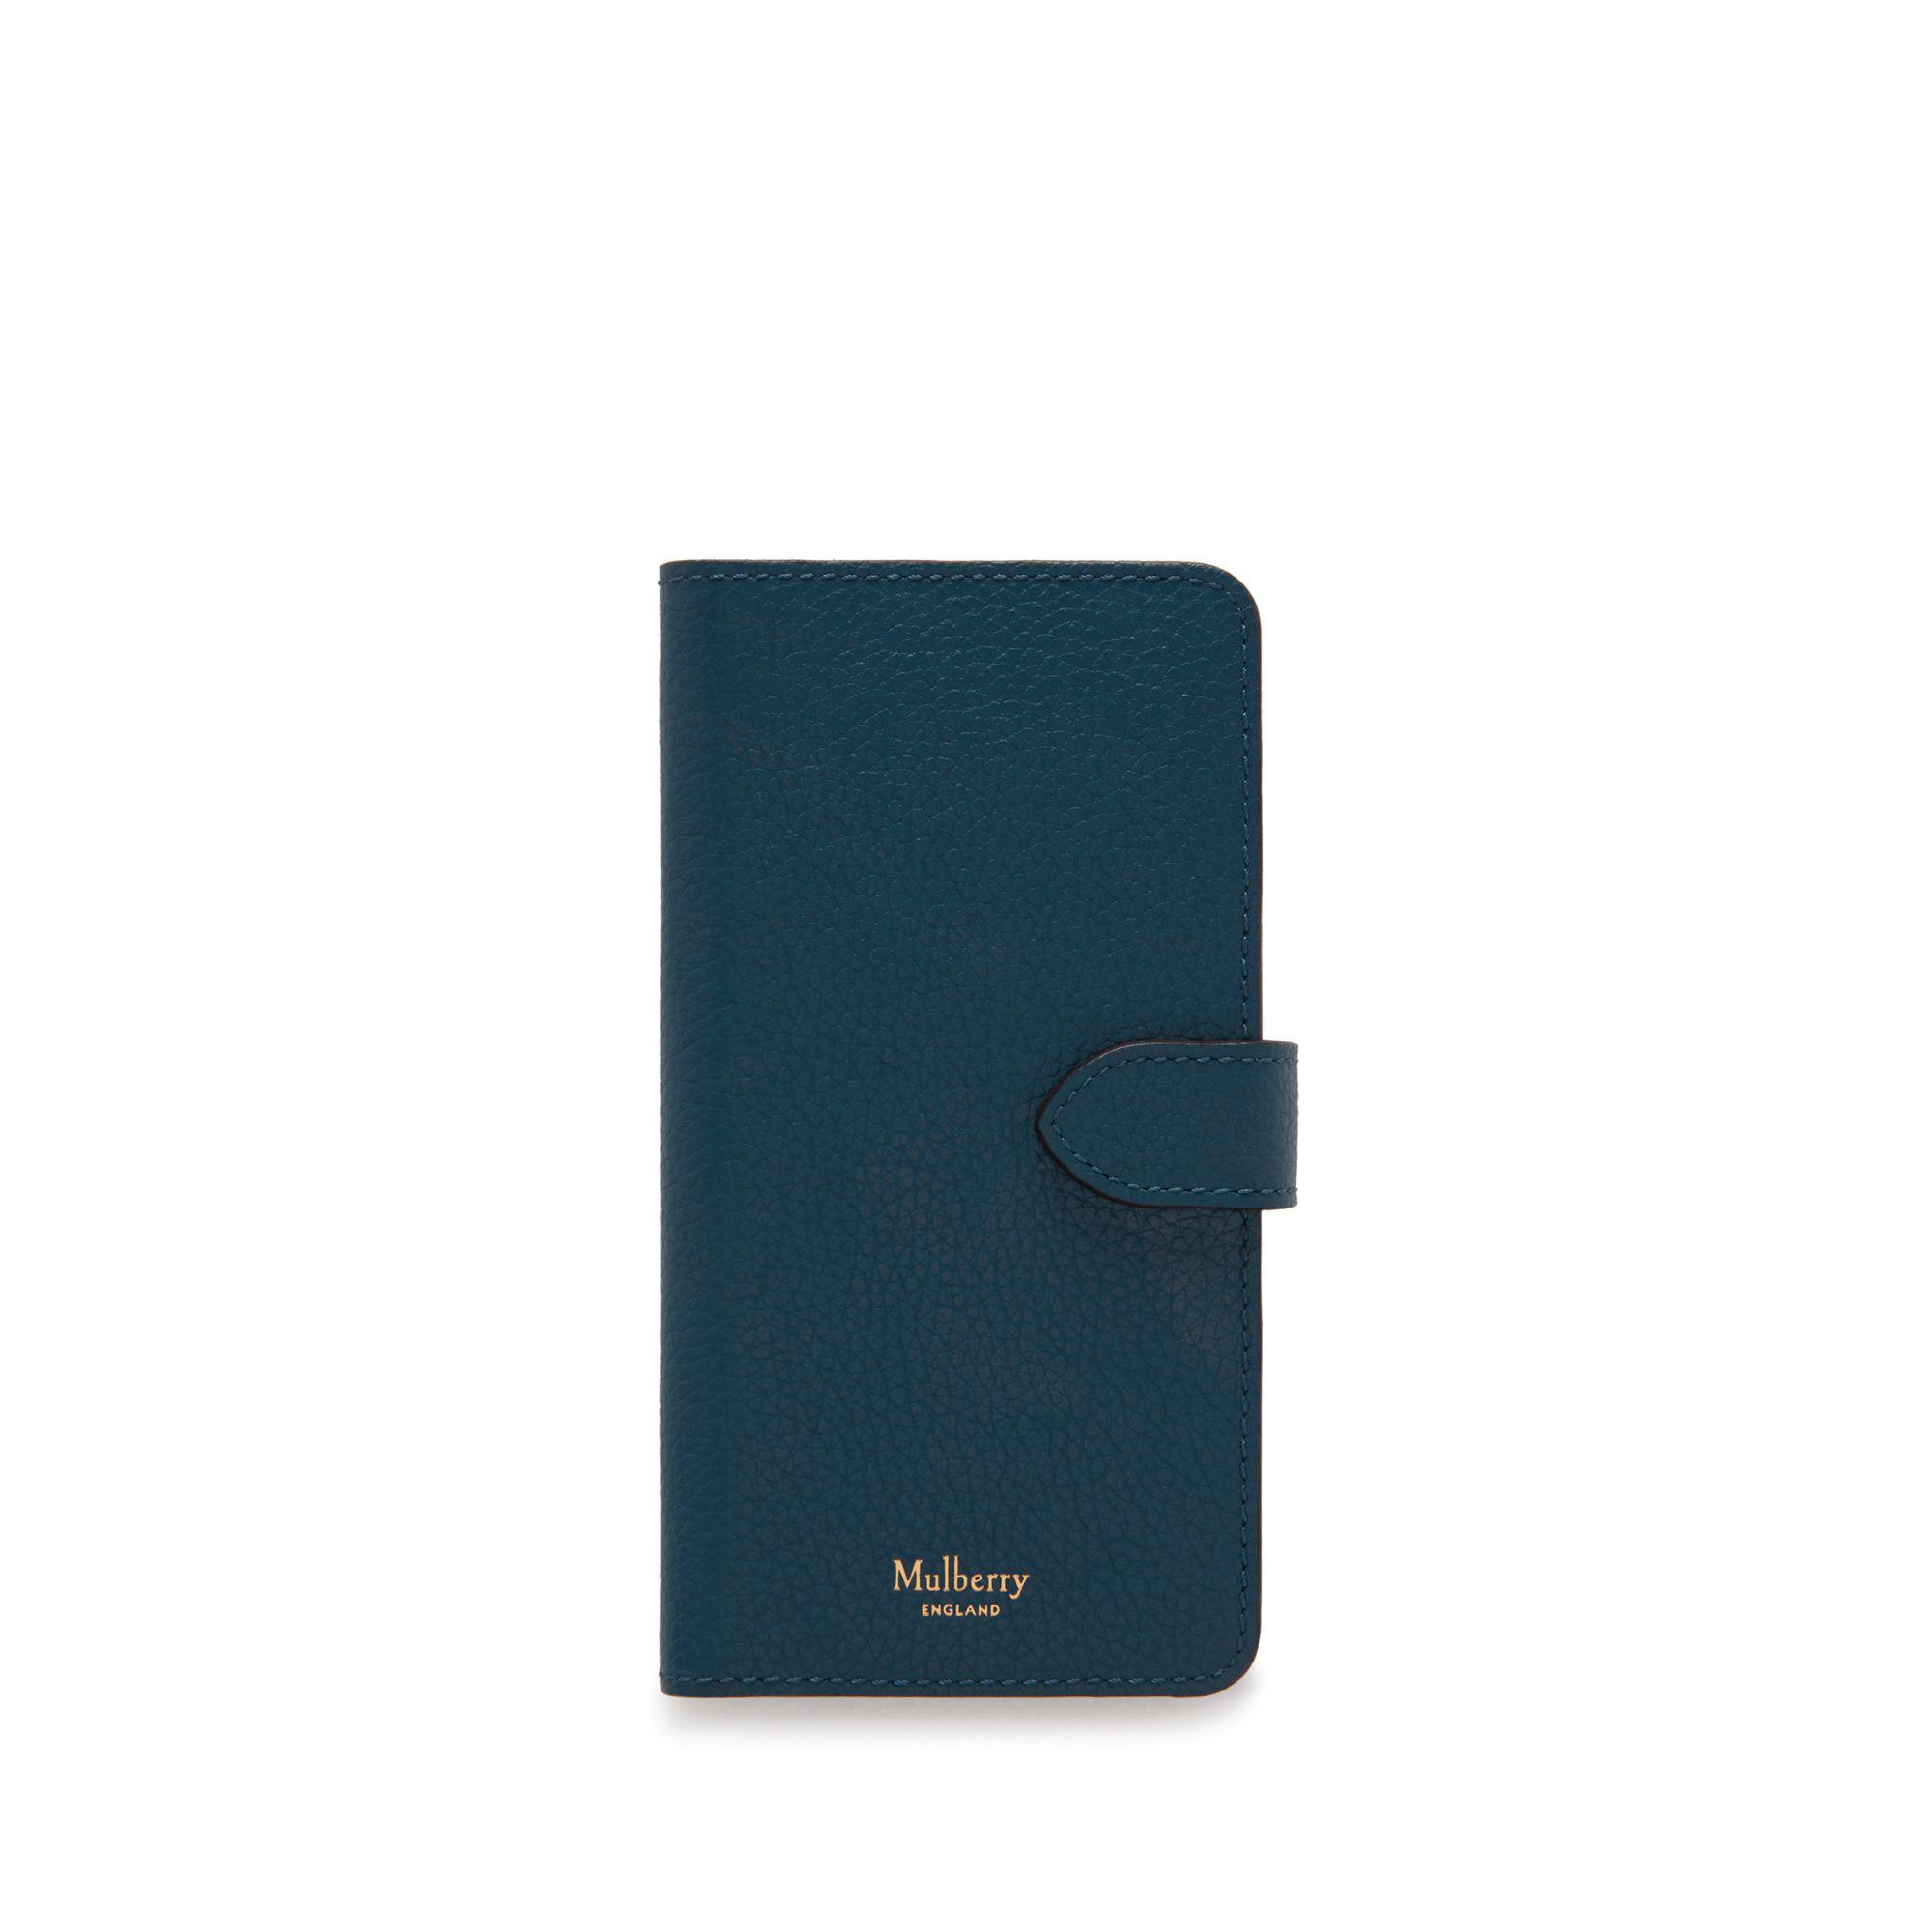 Mulberry Iphone Flip Case In Deep Sea Small Classic Grain in Blue - Lyst